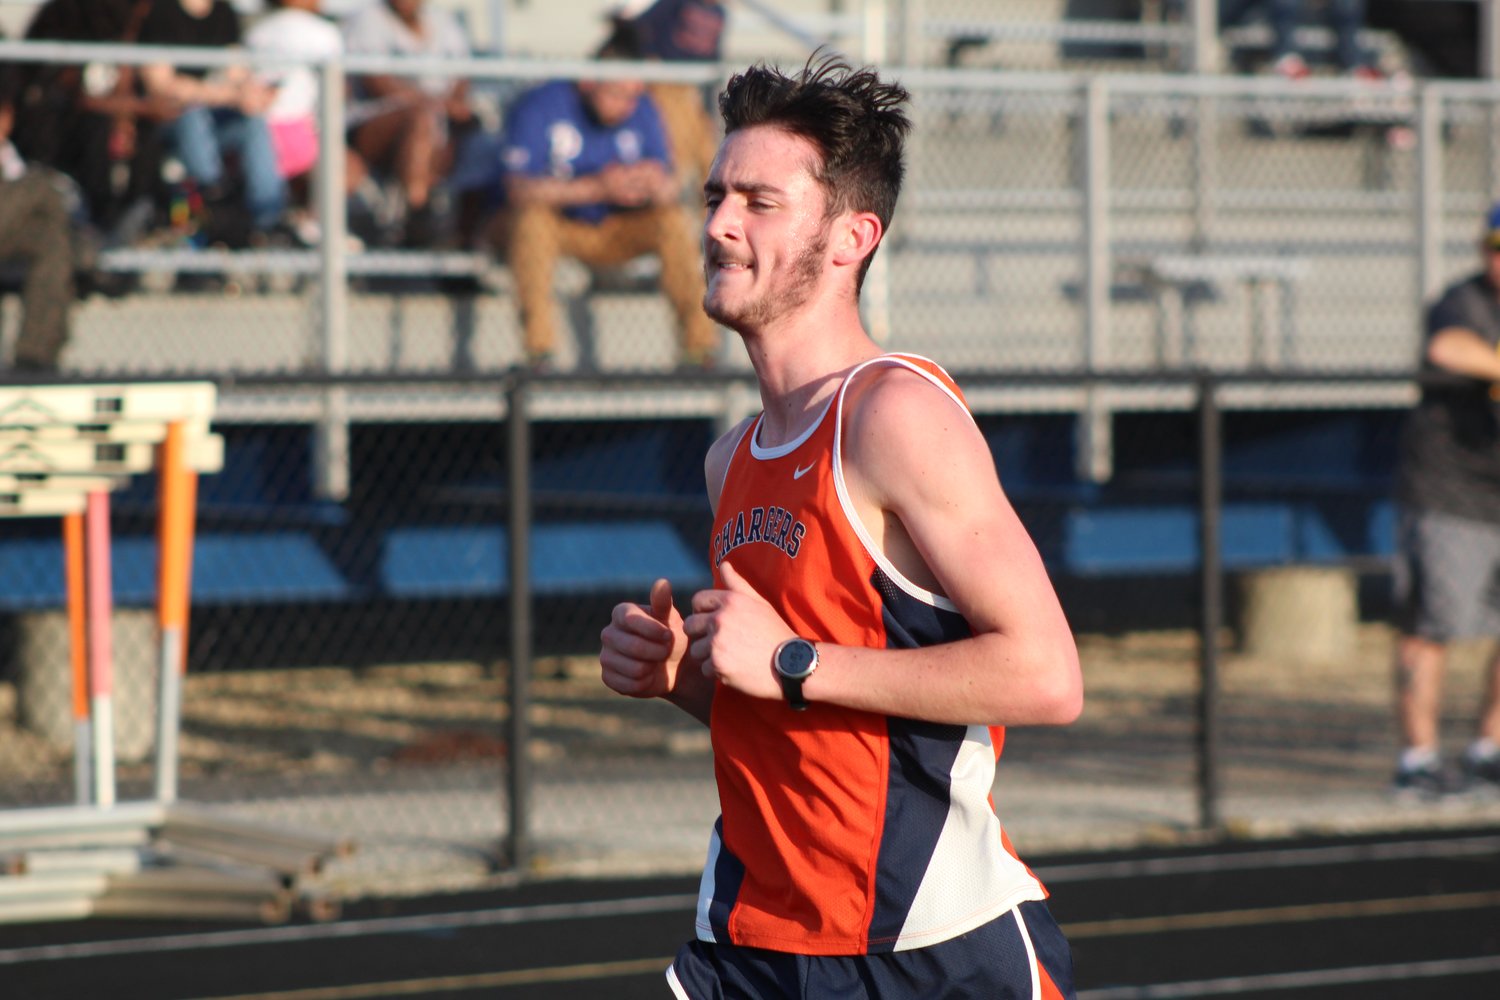 Elijah McCartney earned a pair of third place finishes for the Chargers in the 1600 and 3200 meter runs.